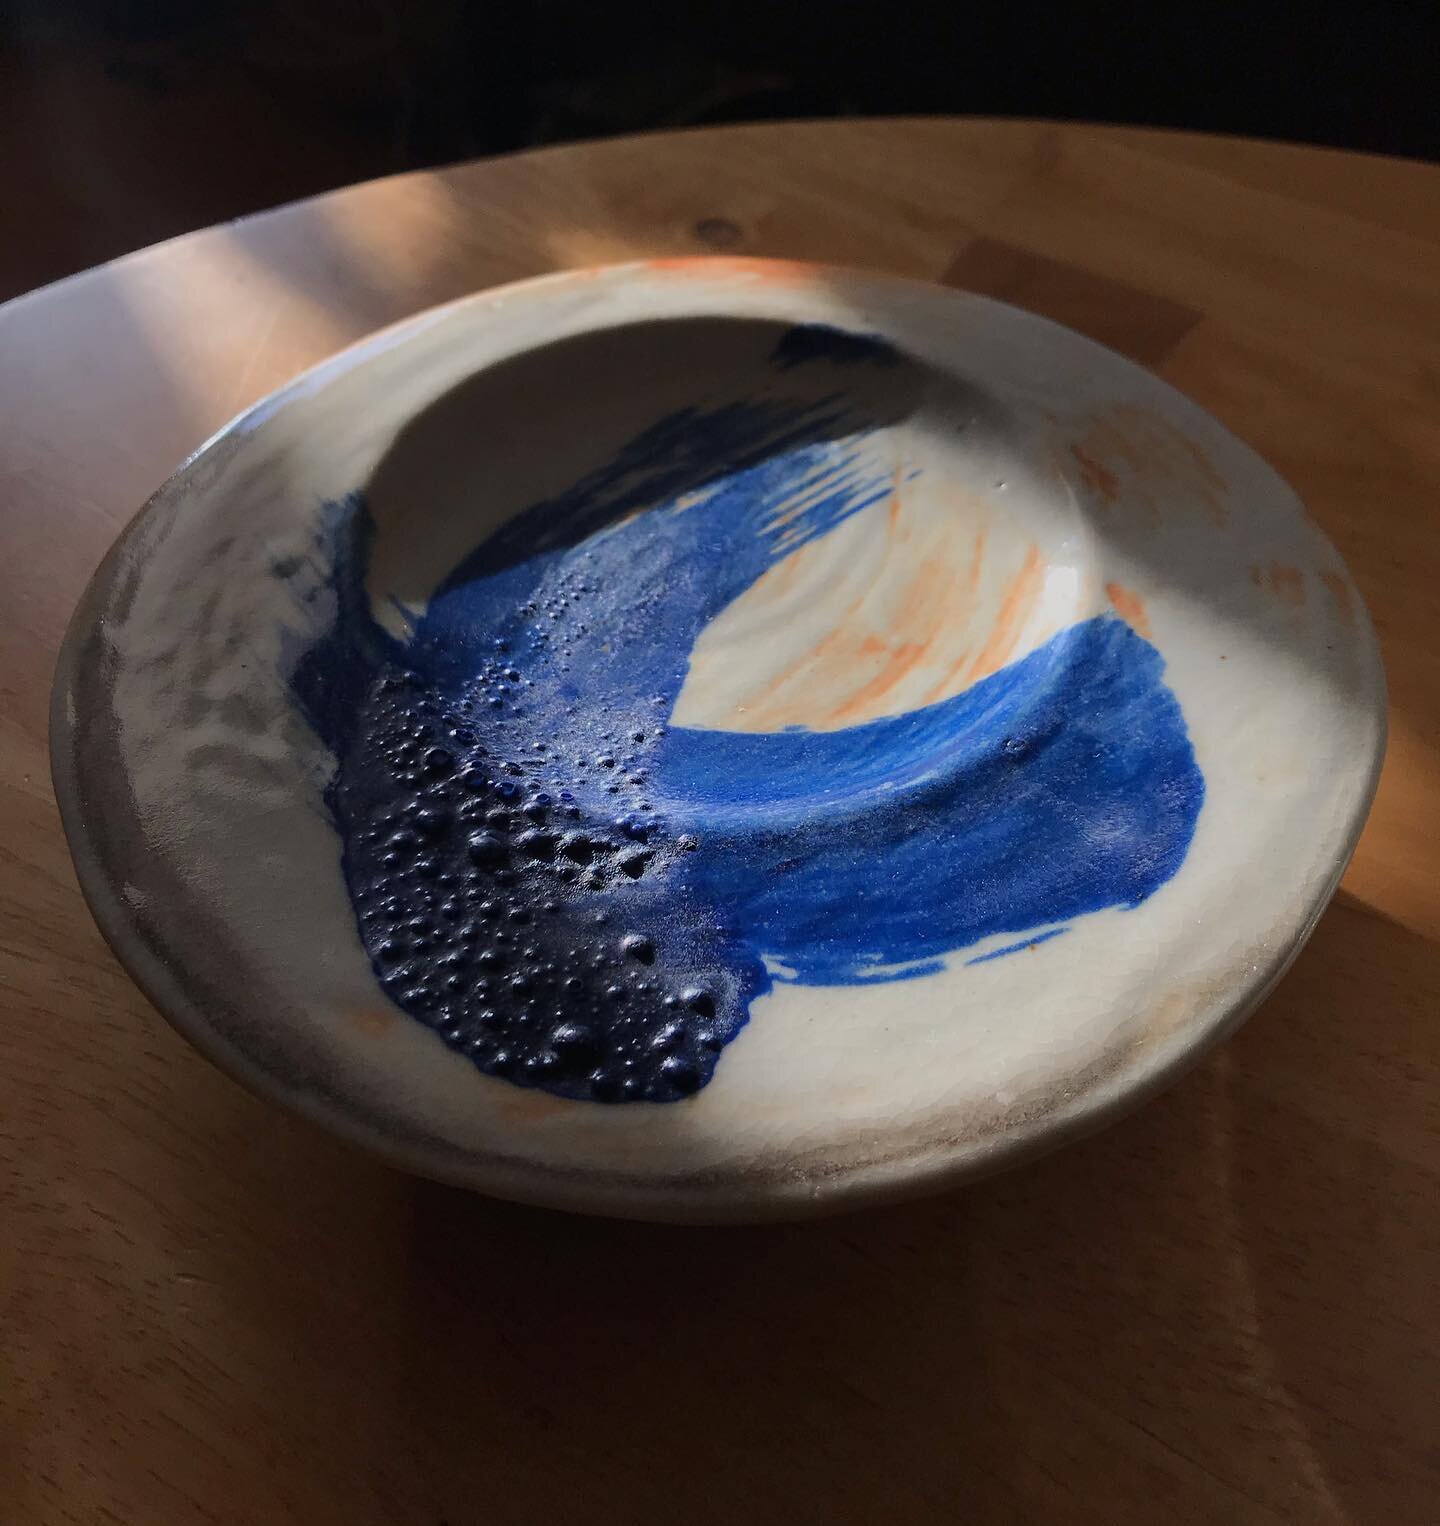 Crater Dish.
Playing with surface techniques. This one was inspired by my incredible teacher Andrew Robinson @acrstudio 
Not sure it complements the subtleties of the form but I have been embracing the opportunity to slow down and experiment in the s